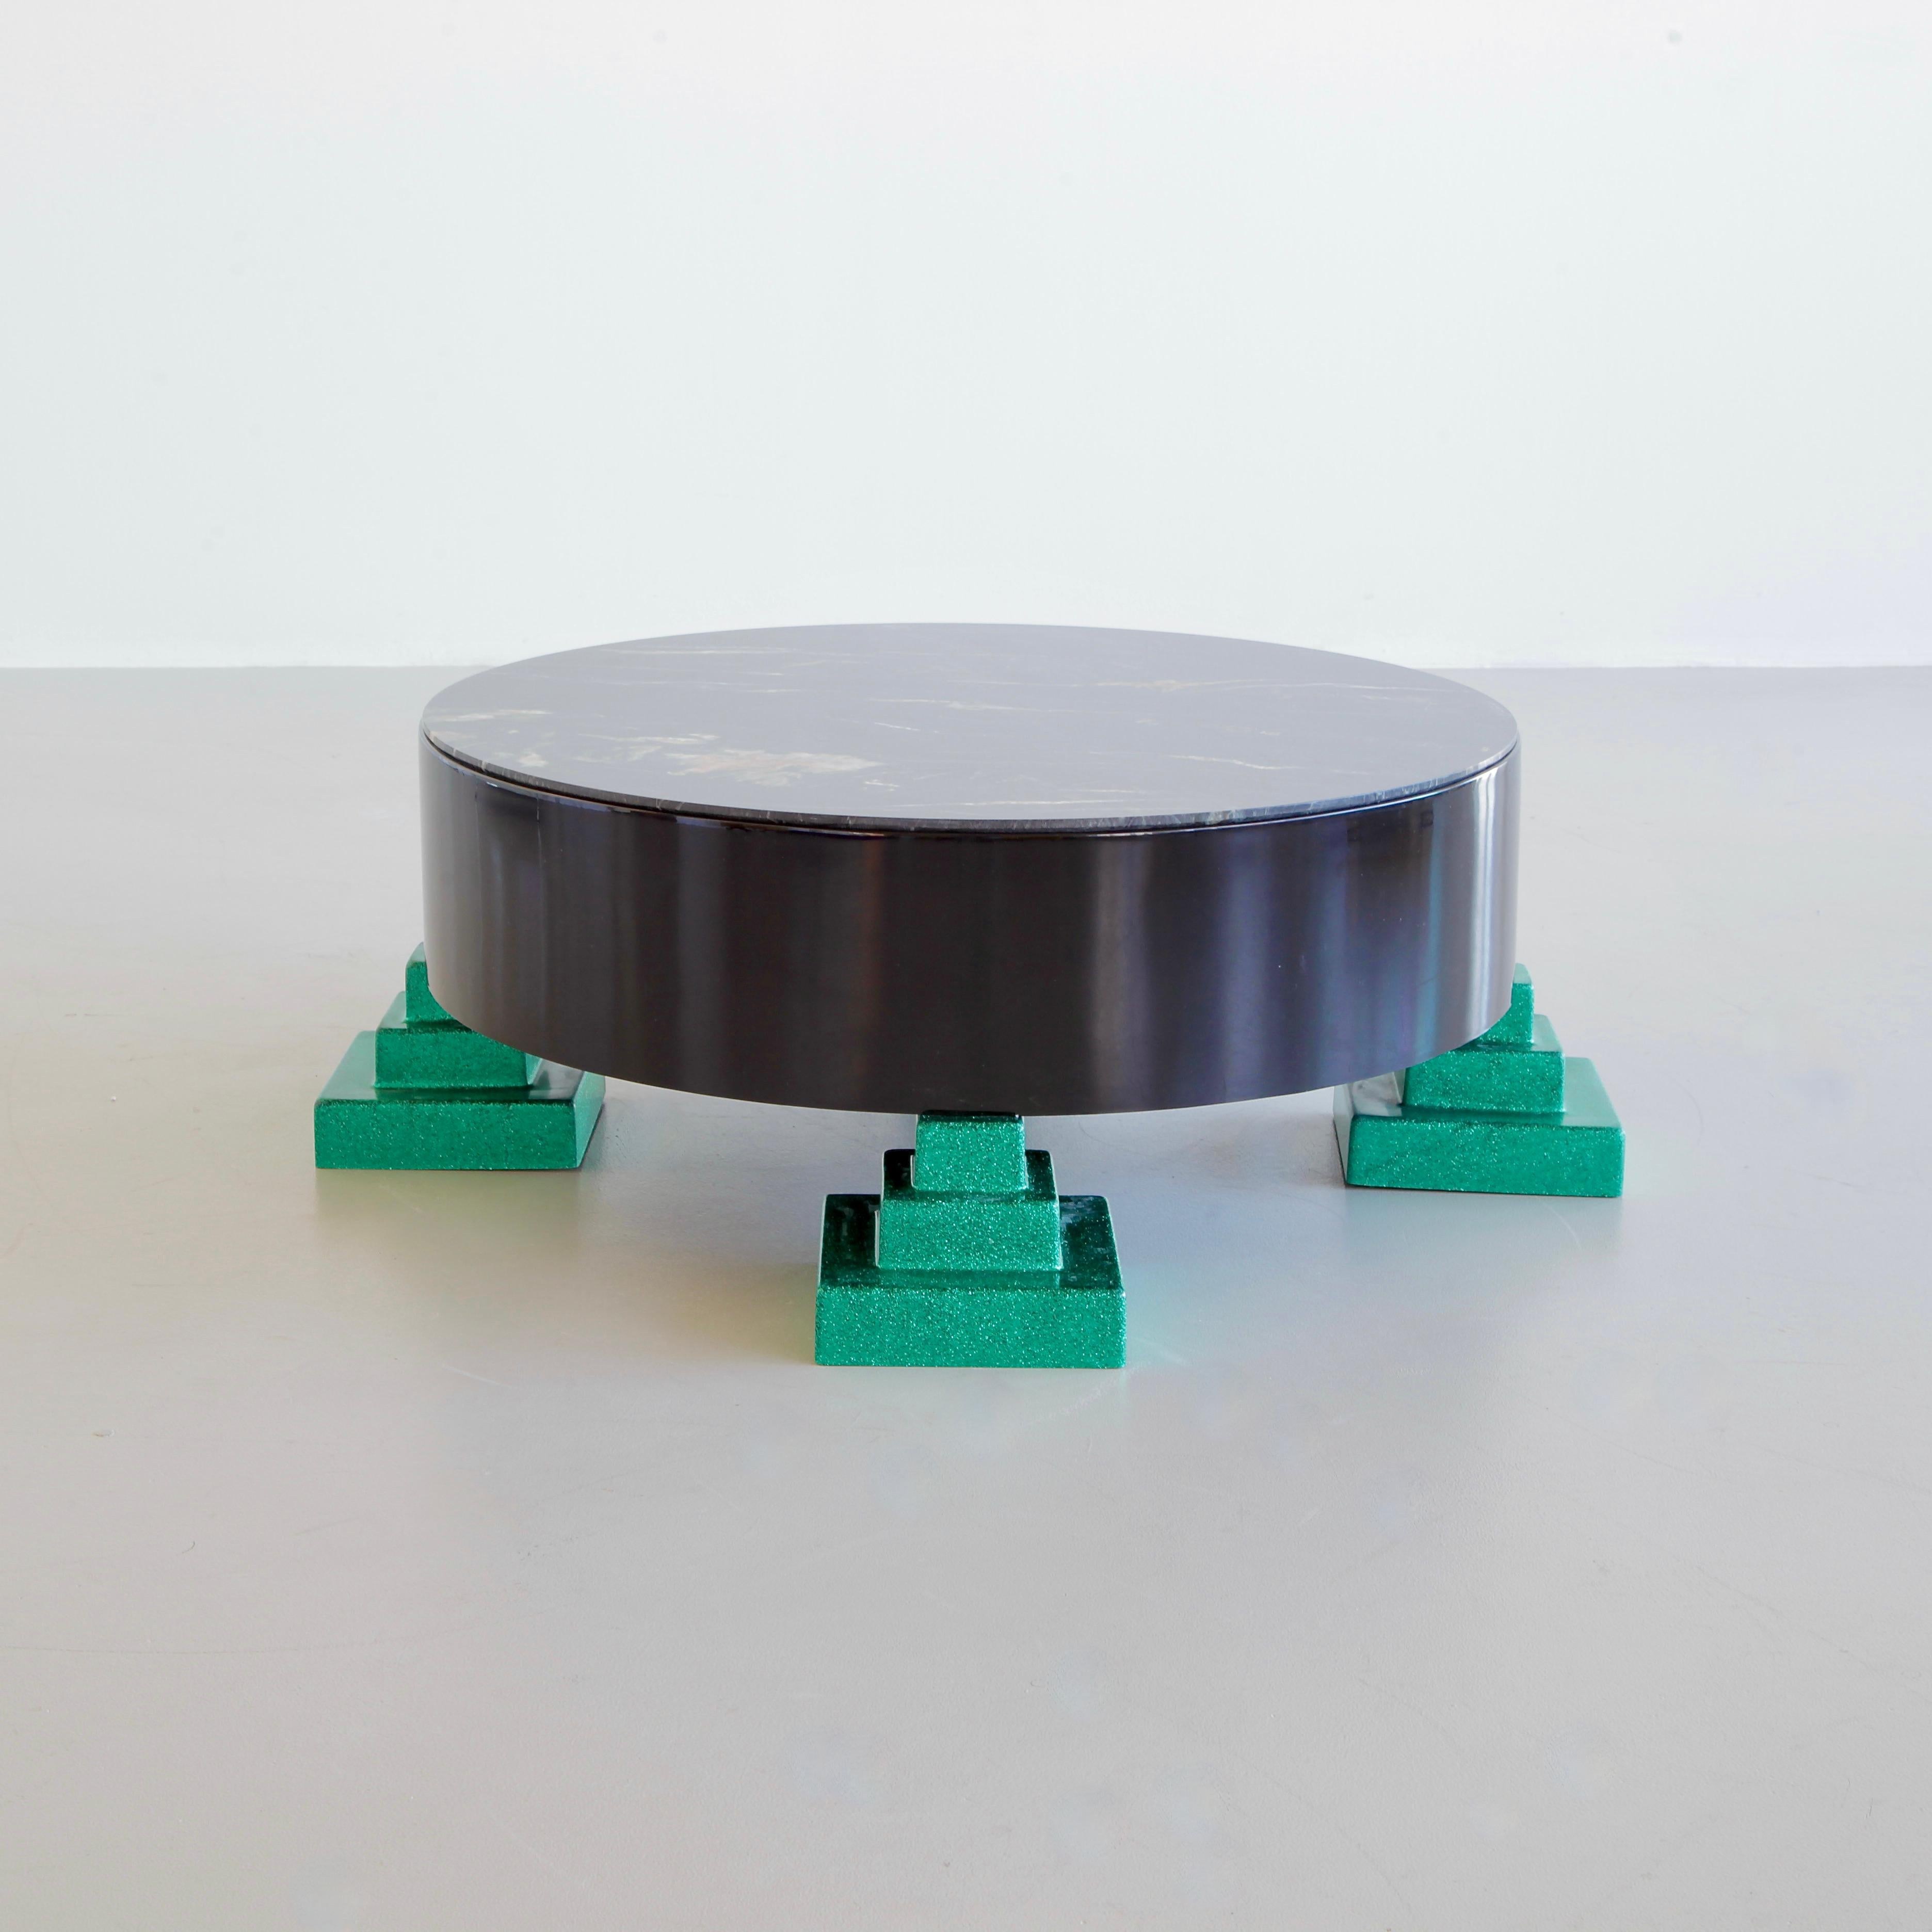 Late 20th Century Coffee table 'PARK LANE', designed by Ettore Sottsass in 1983, Italy.